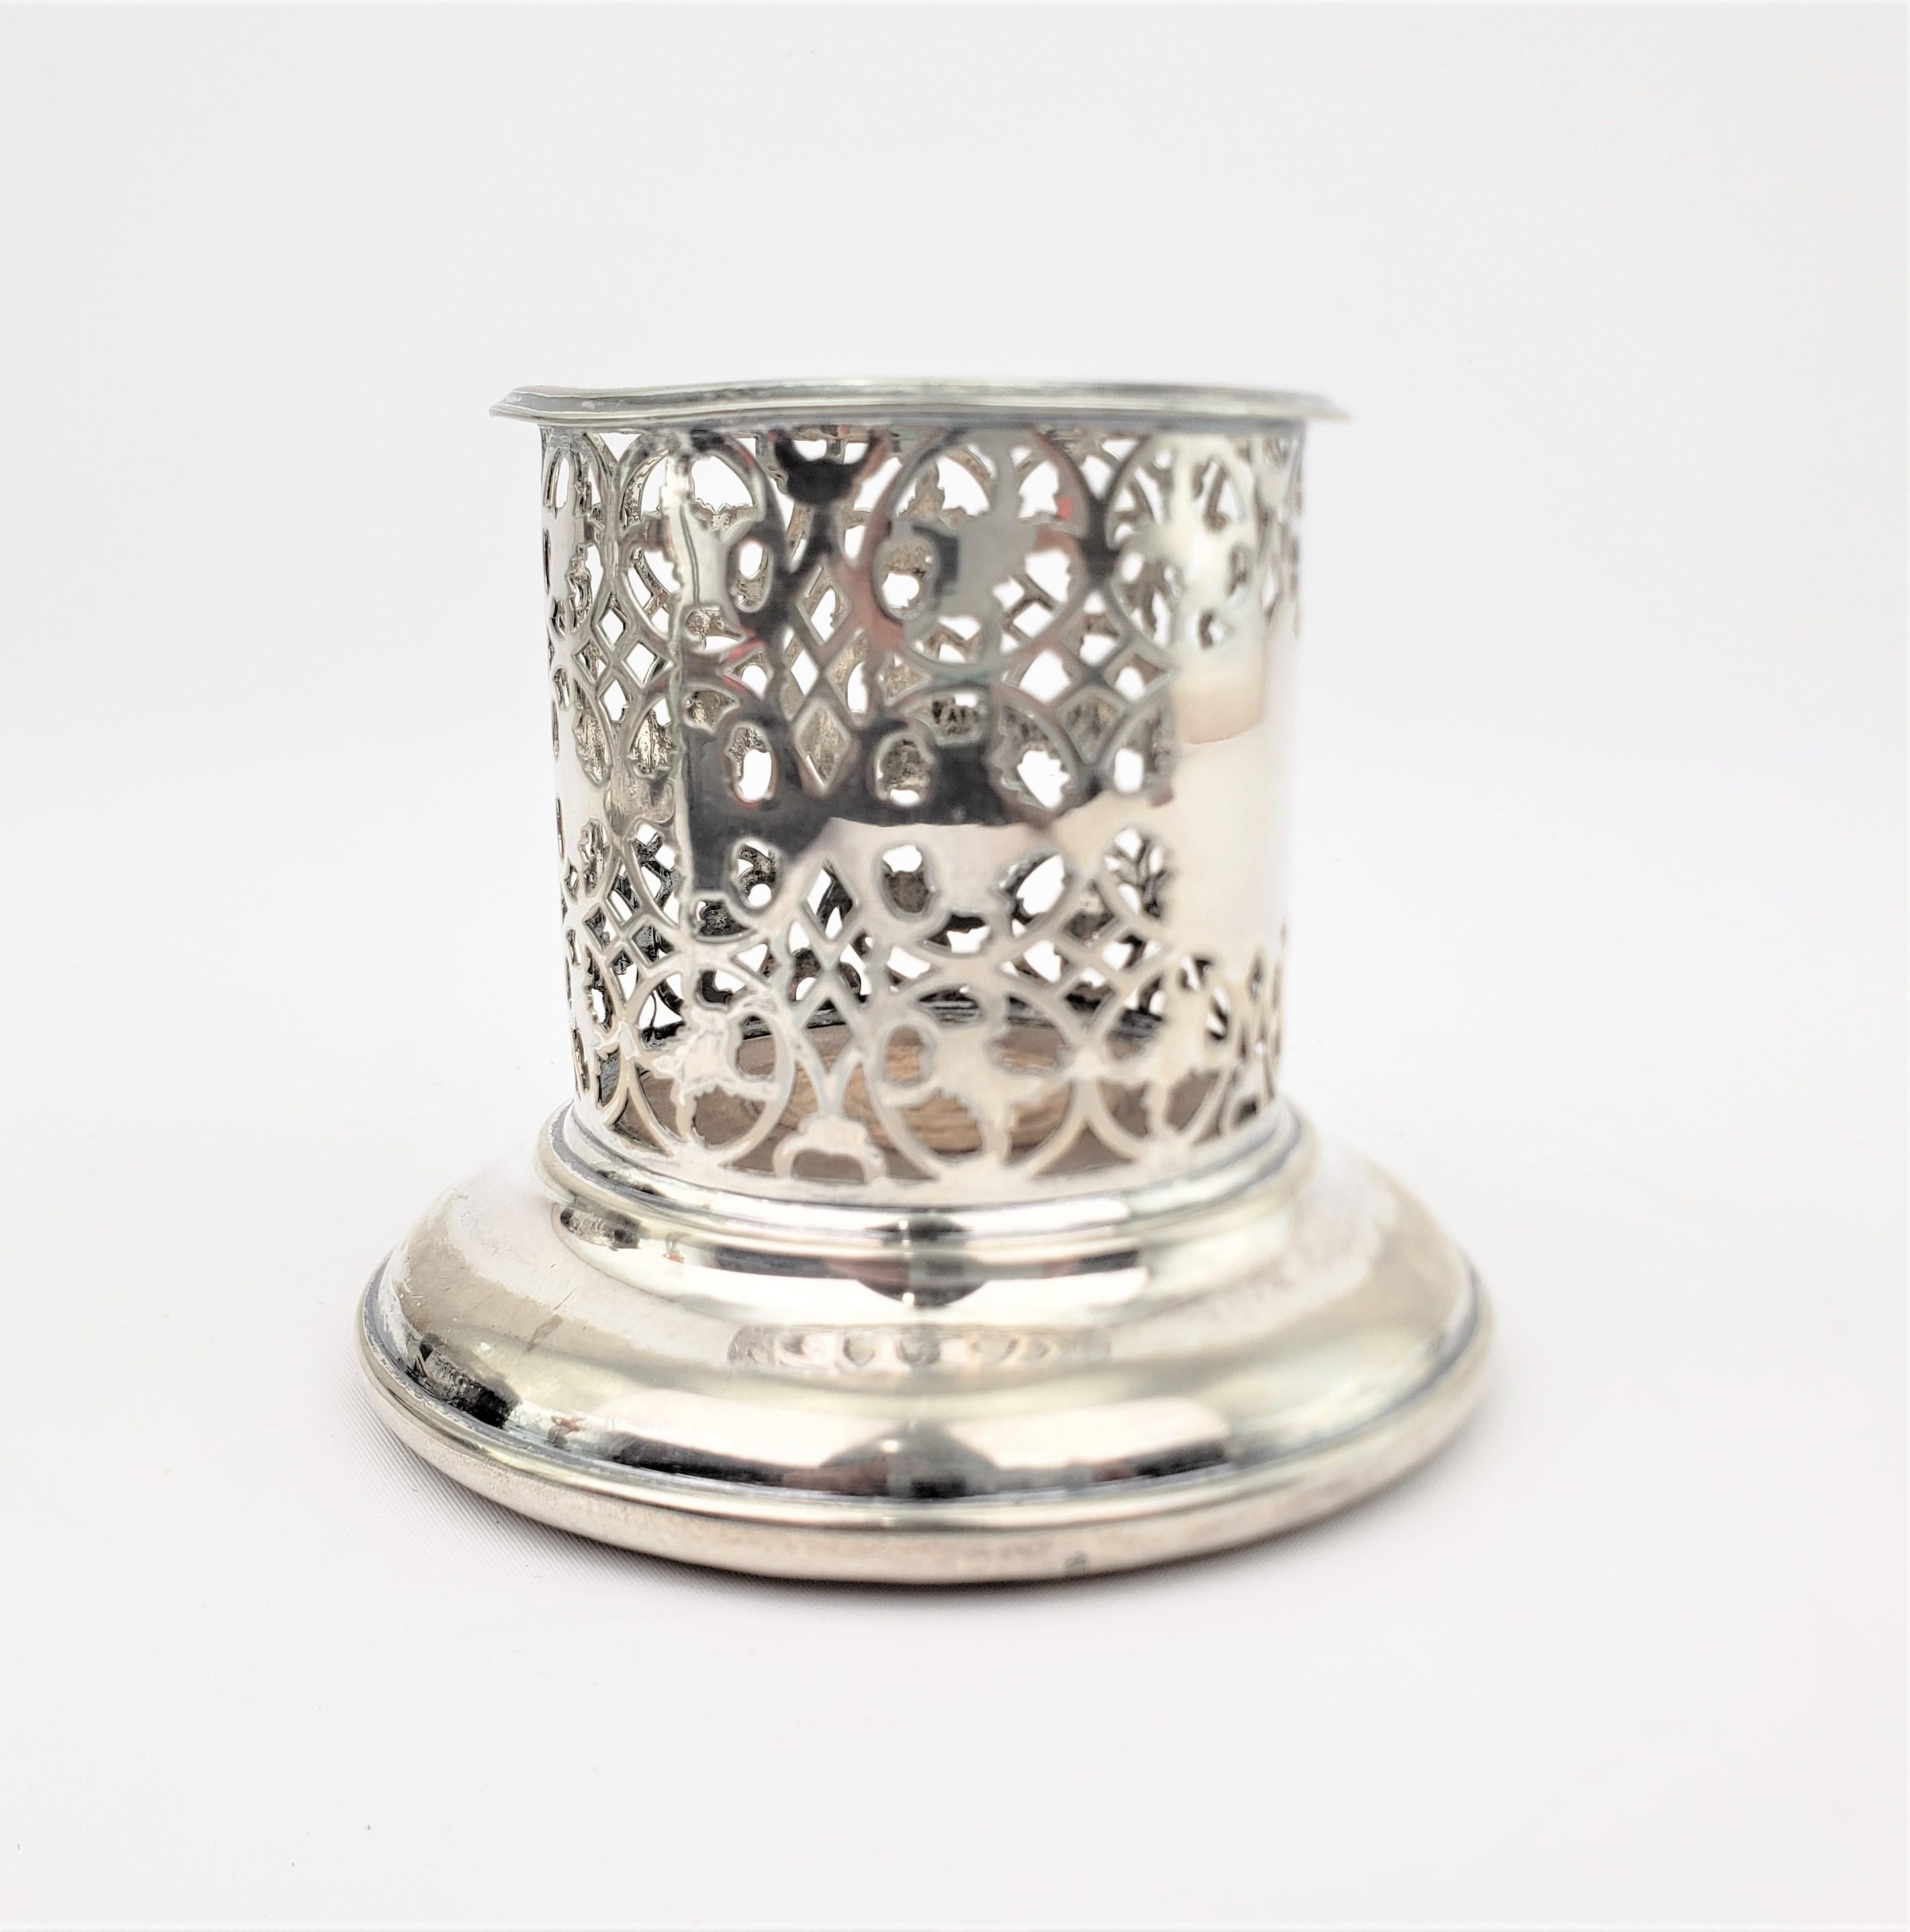 This silver plated bottle coaster is unsigned, but presumed to have been made in England in approximately 1920 in a slightly earlier Edwardian style. The coaster has tall pierced gallery styled sides with a shield medallion on the front which has